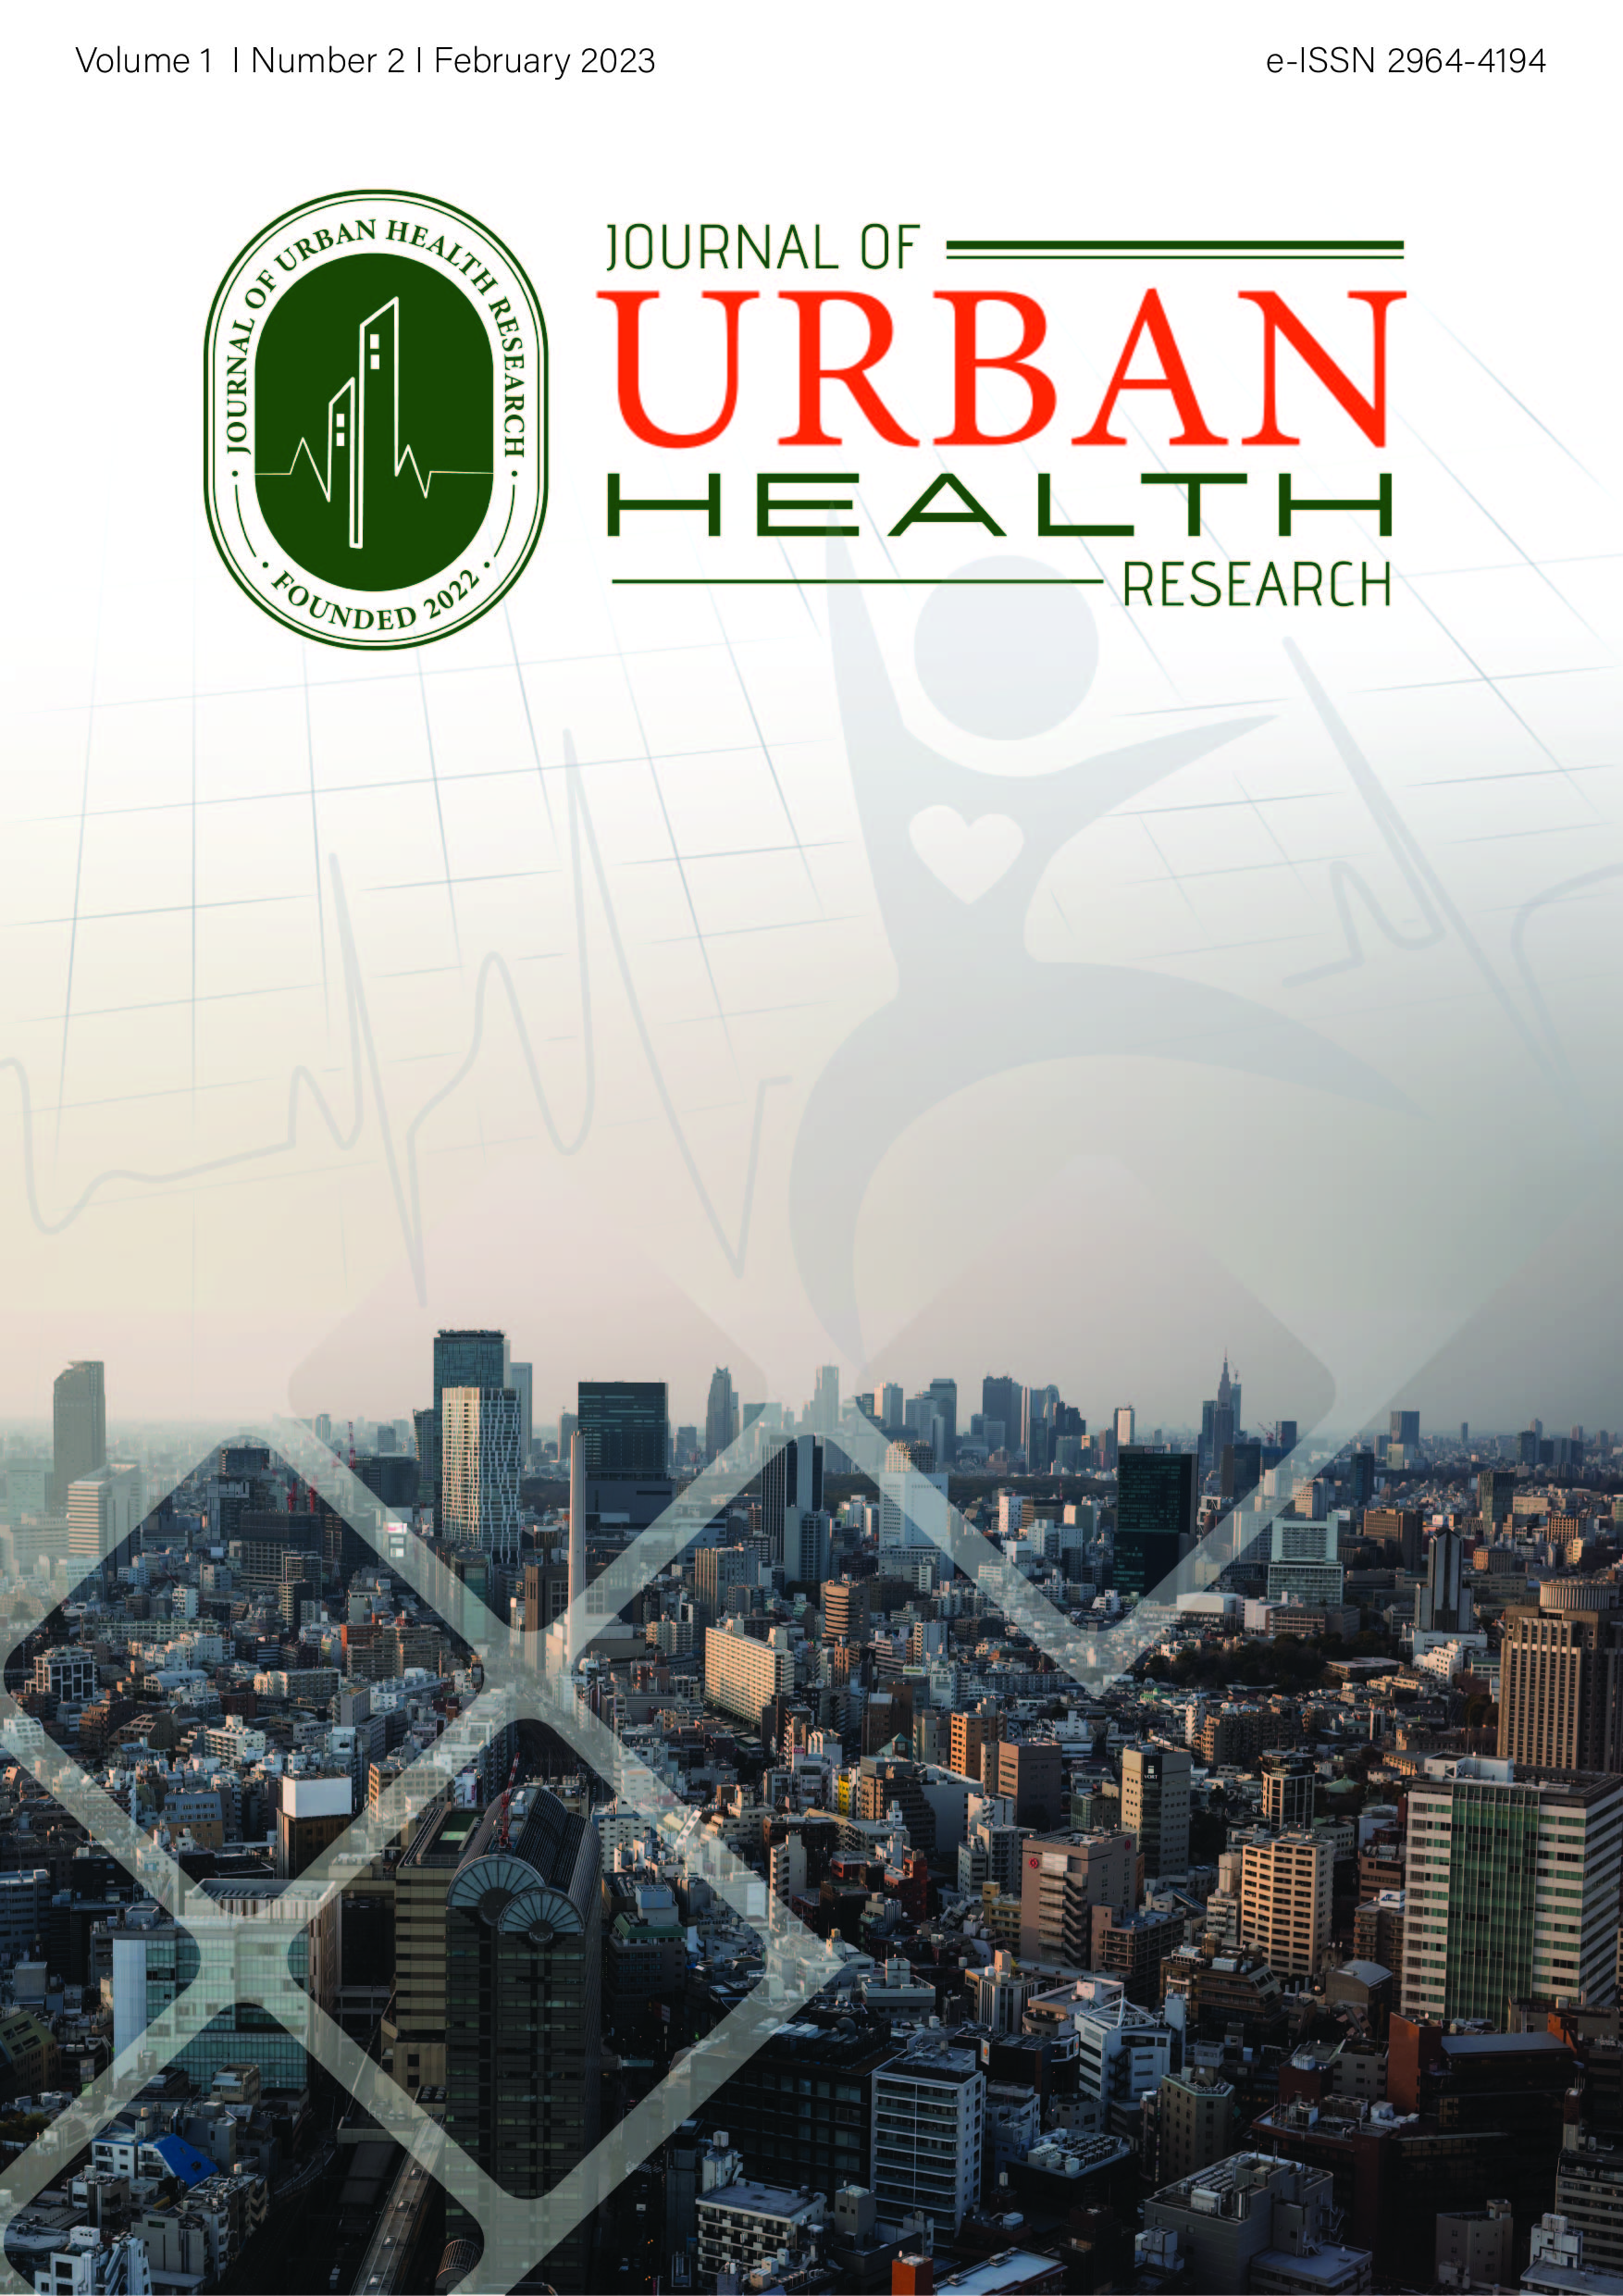 					View Vol. 1 No. 2 (2023): Journal of Urban Health Research
				